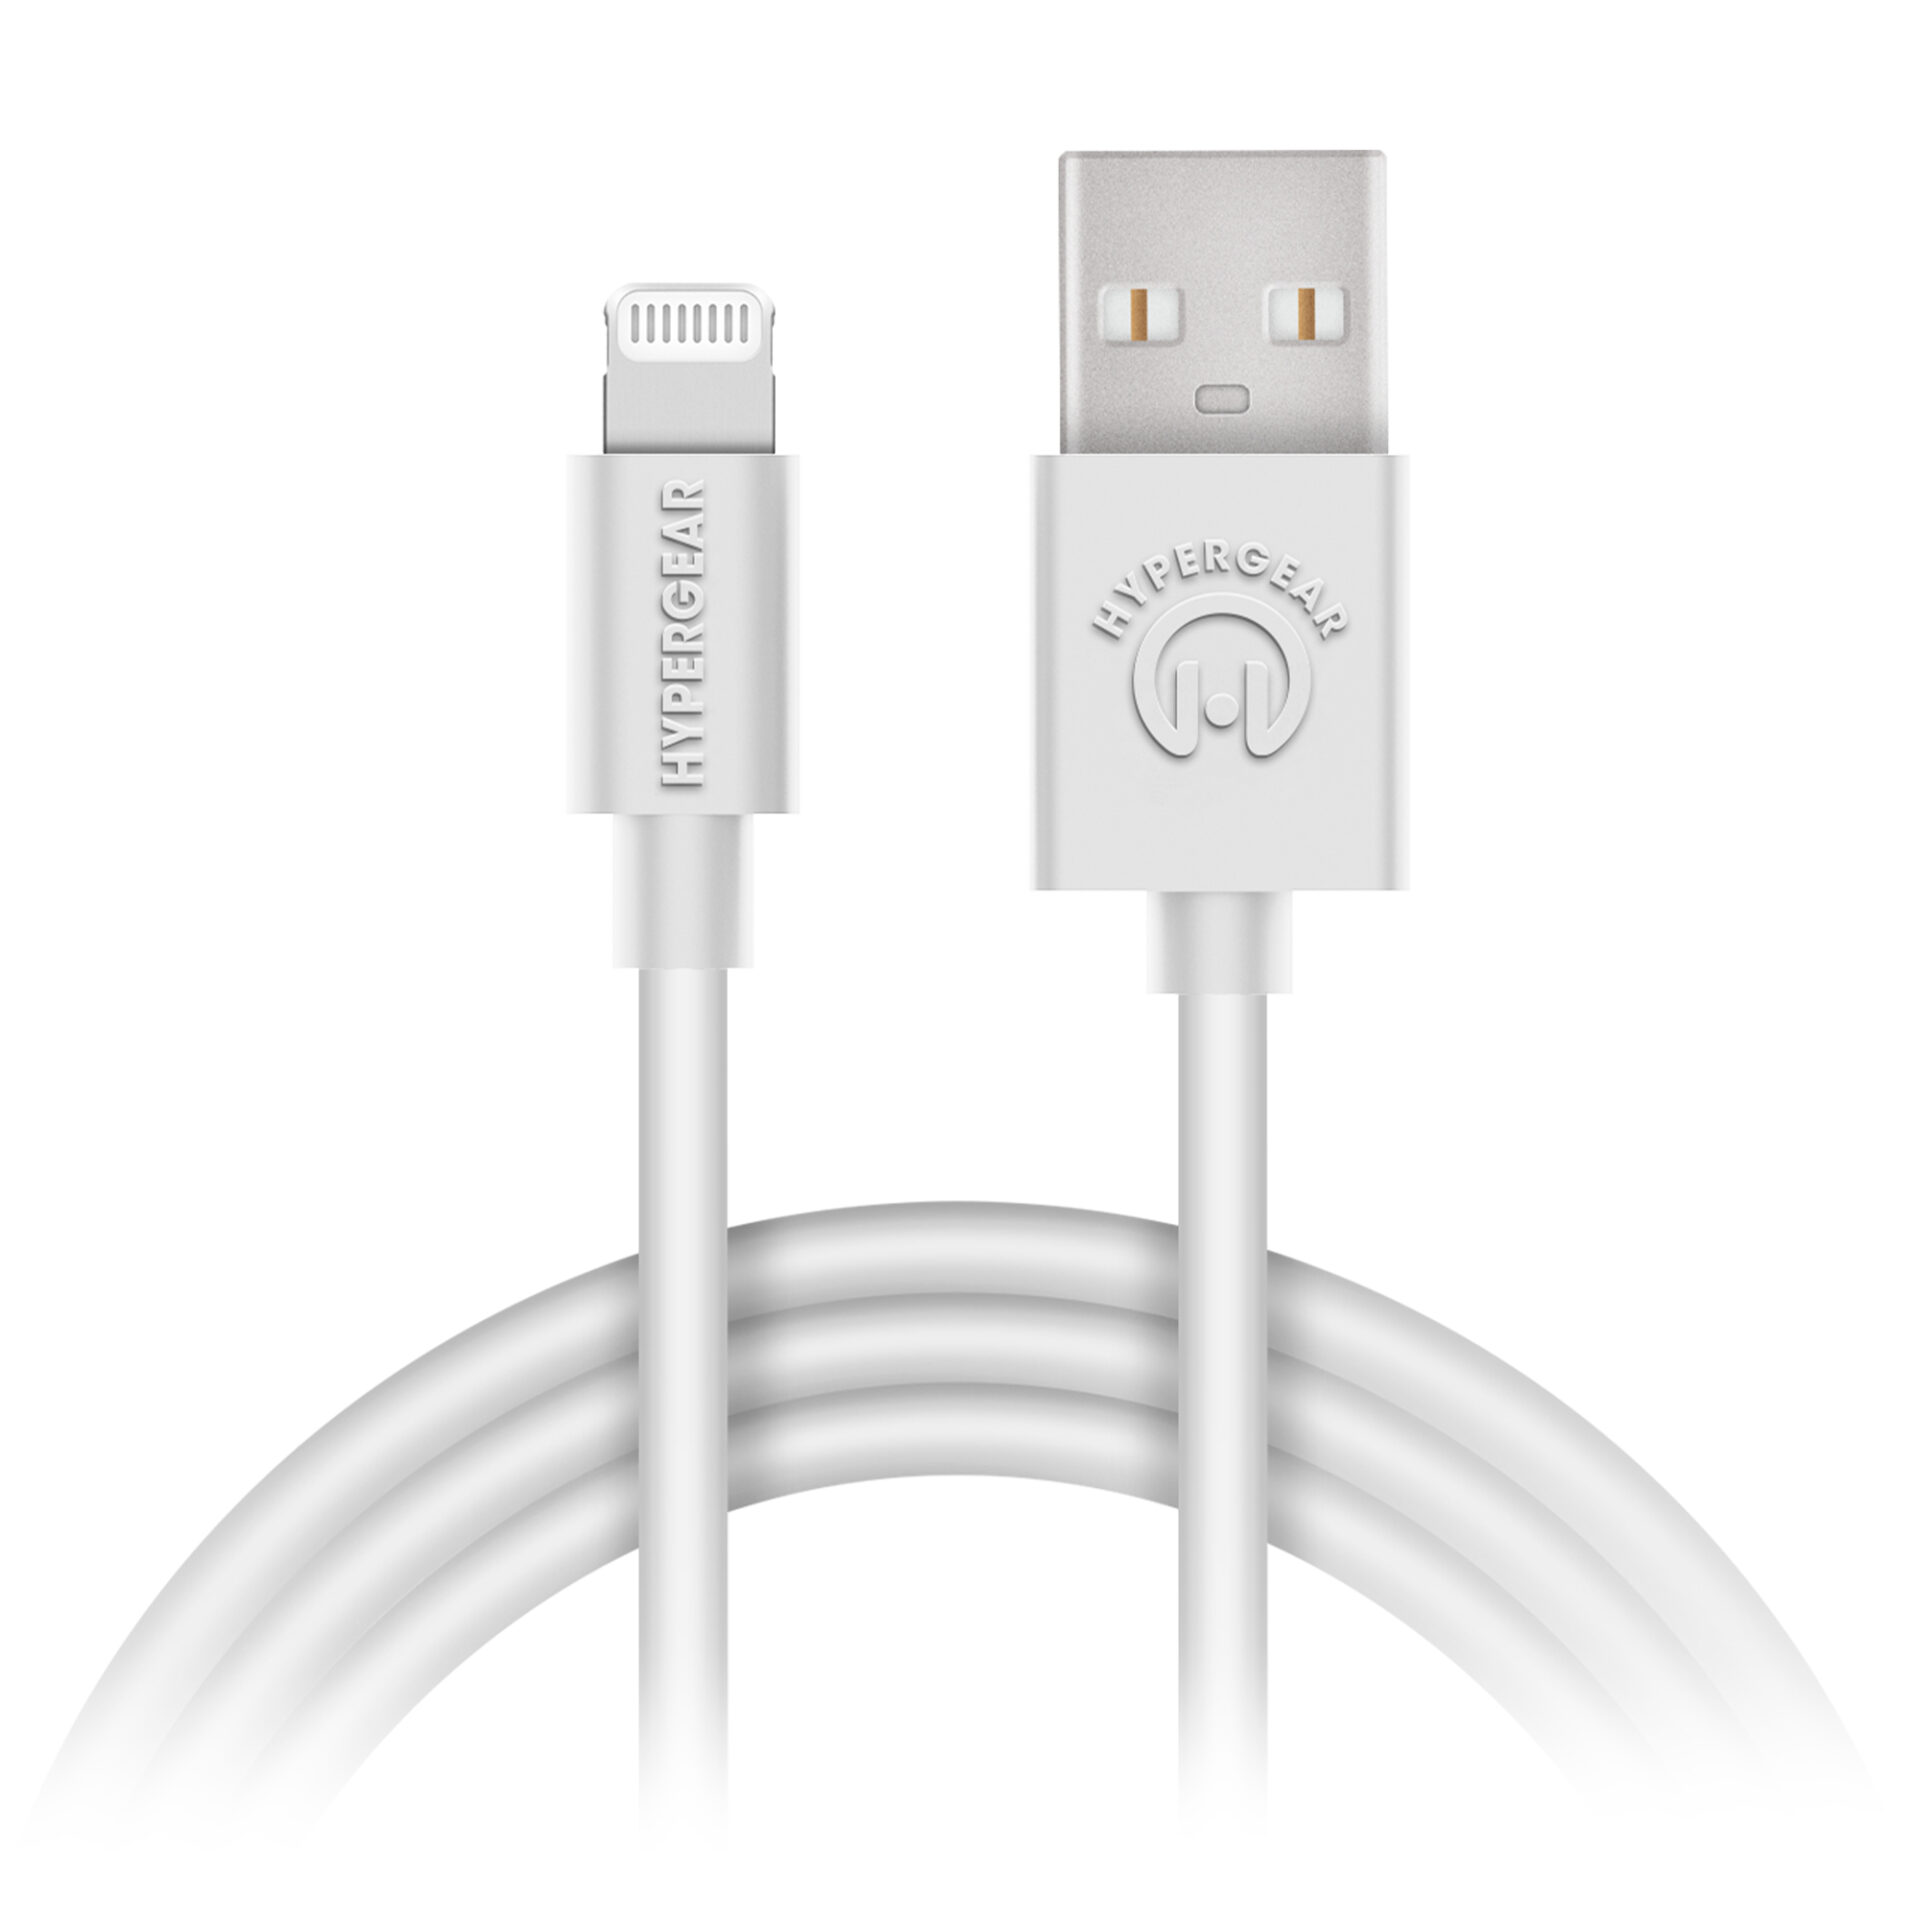 HyperGear USB to Lightning Cable 4ft White